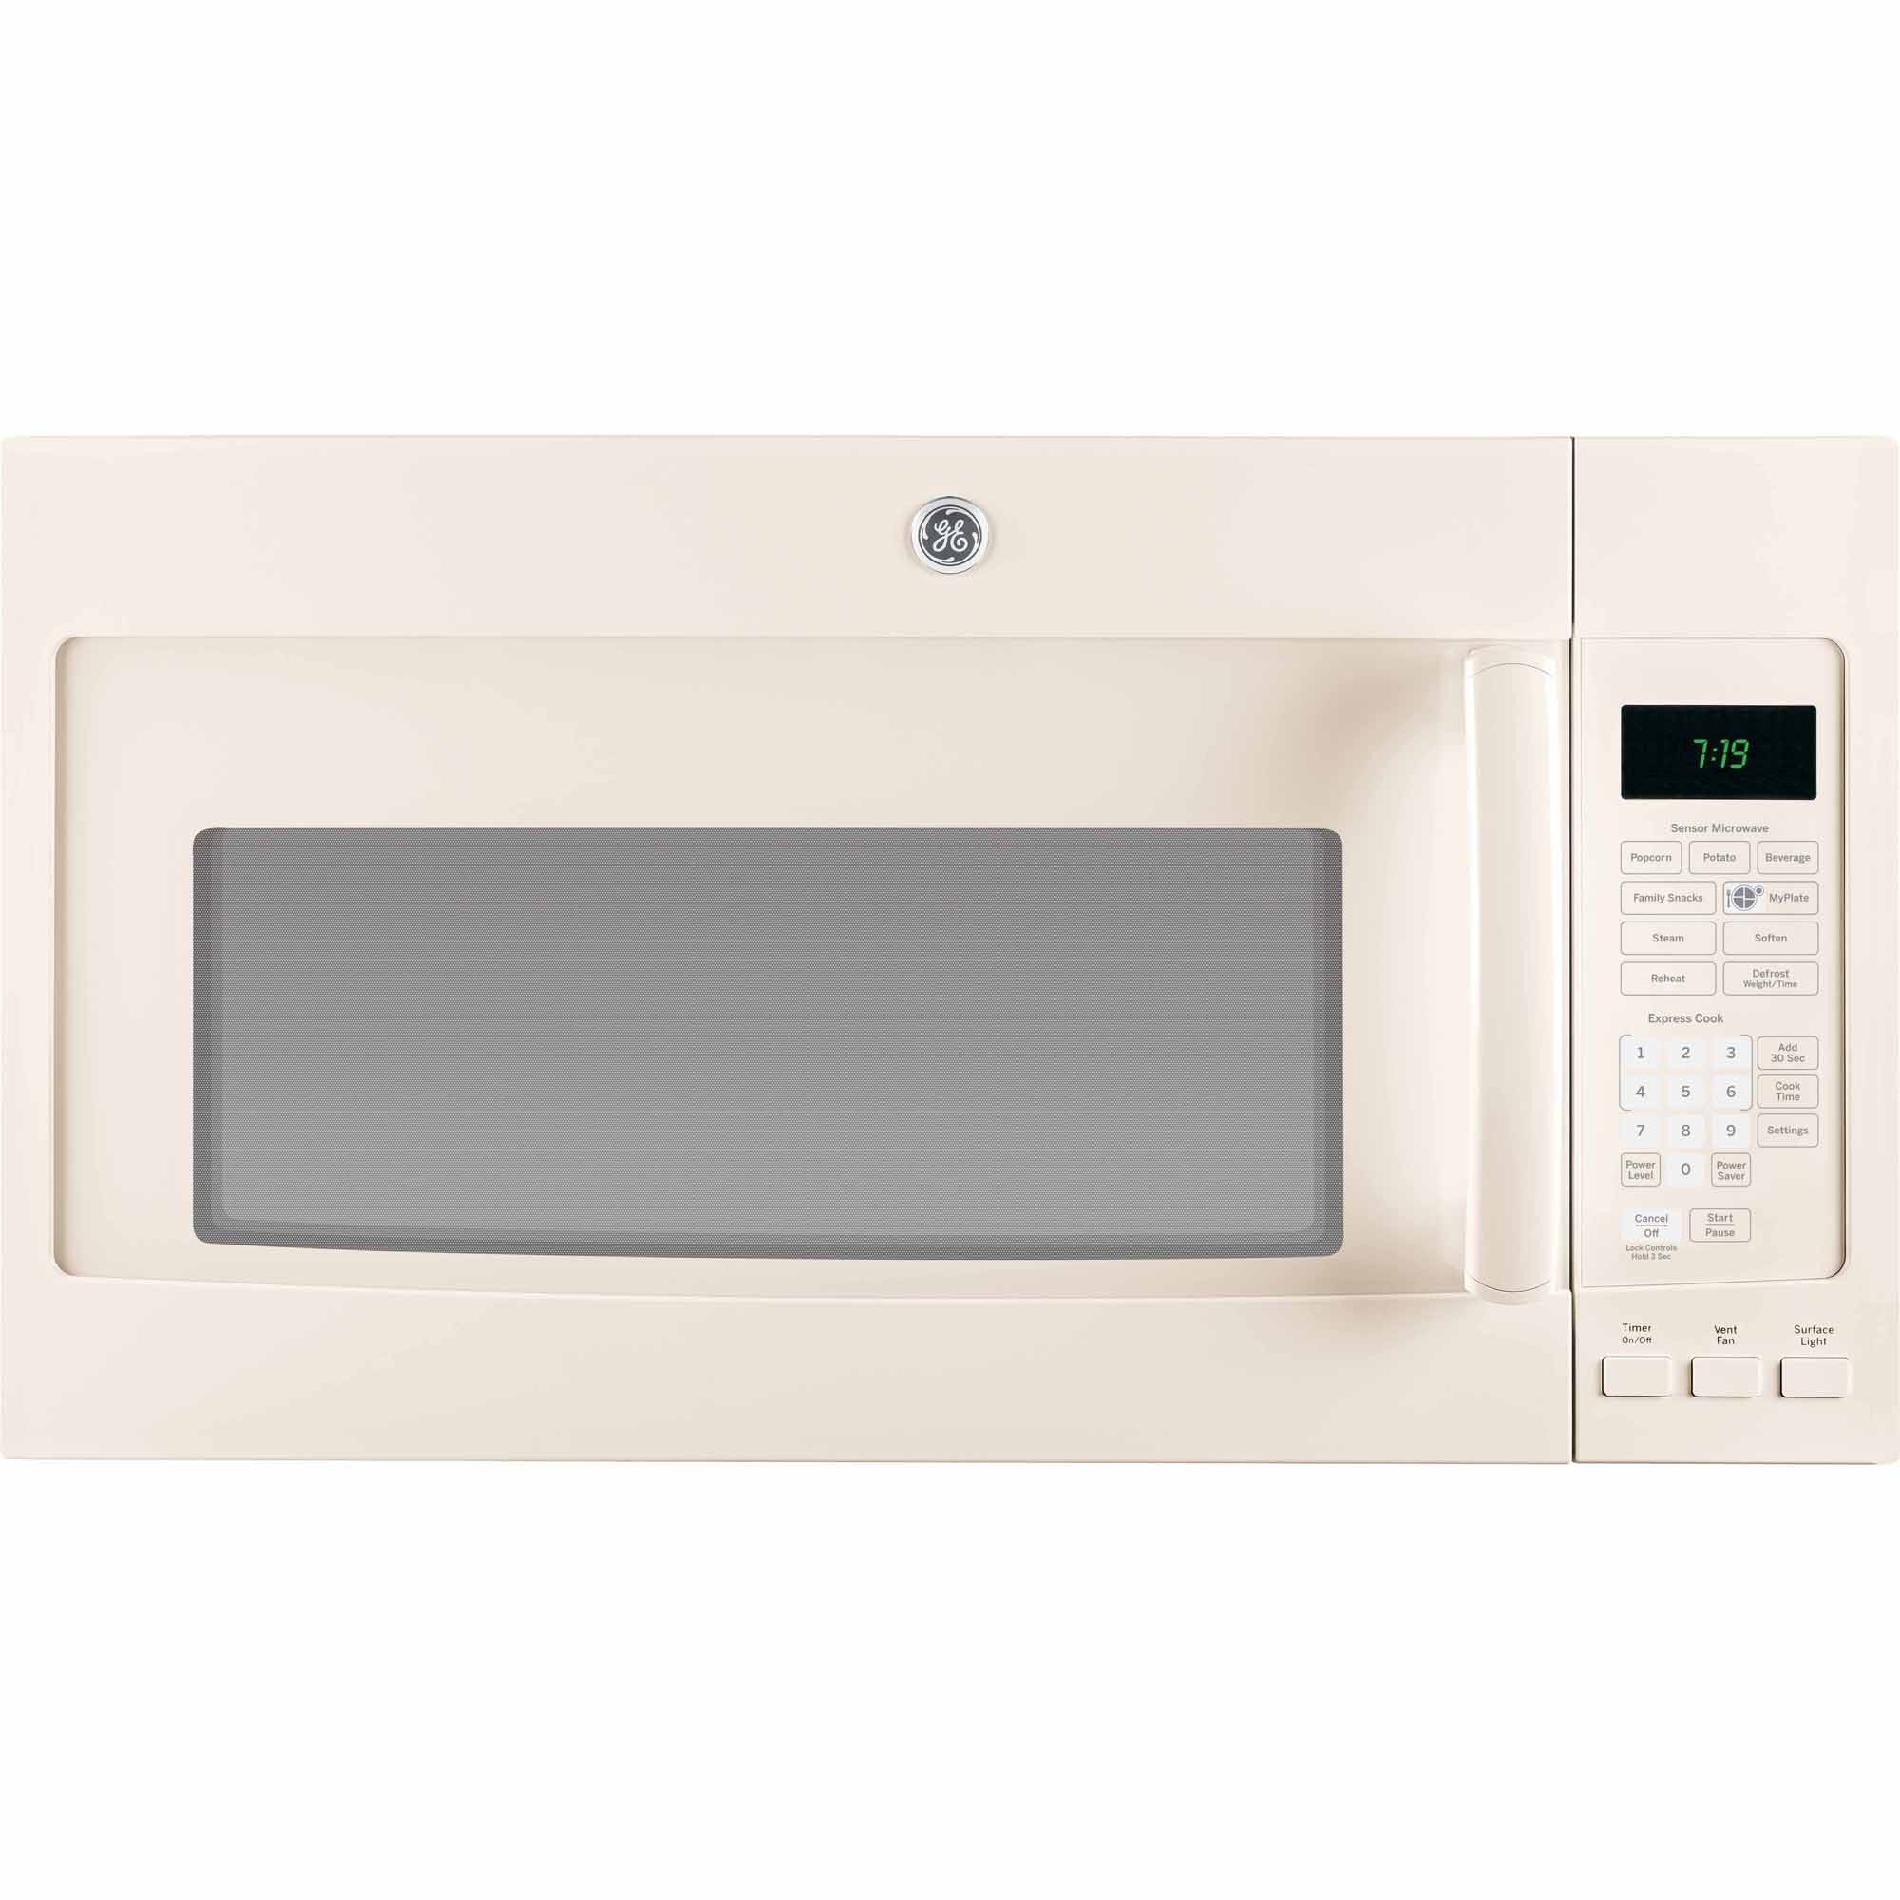 Over The Range Microwave Bisque
 GE Appliances JNM7196DFCC 1 9 cu ft Over the Range